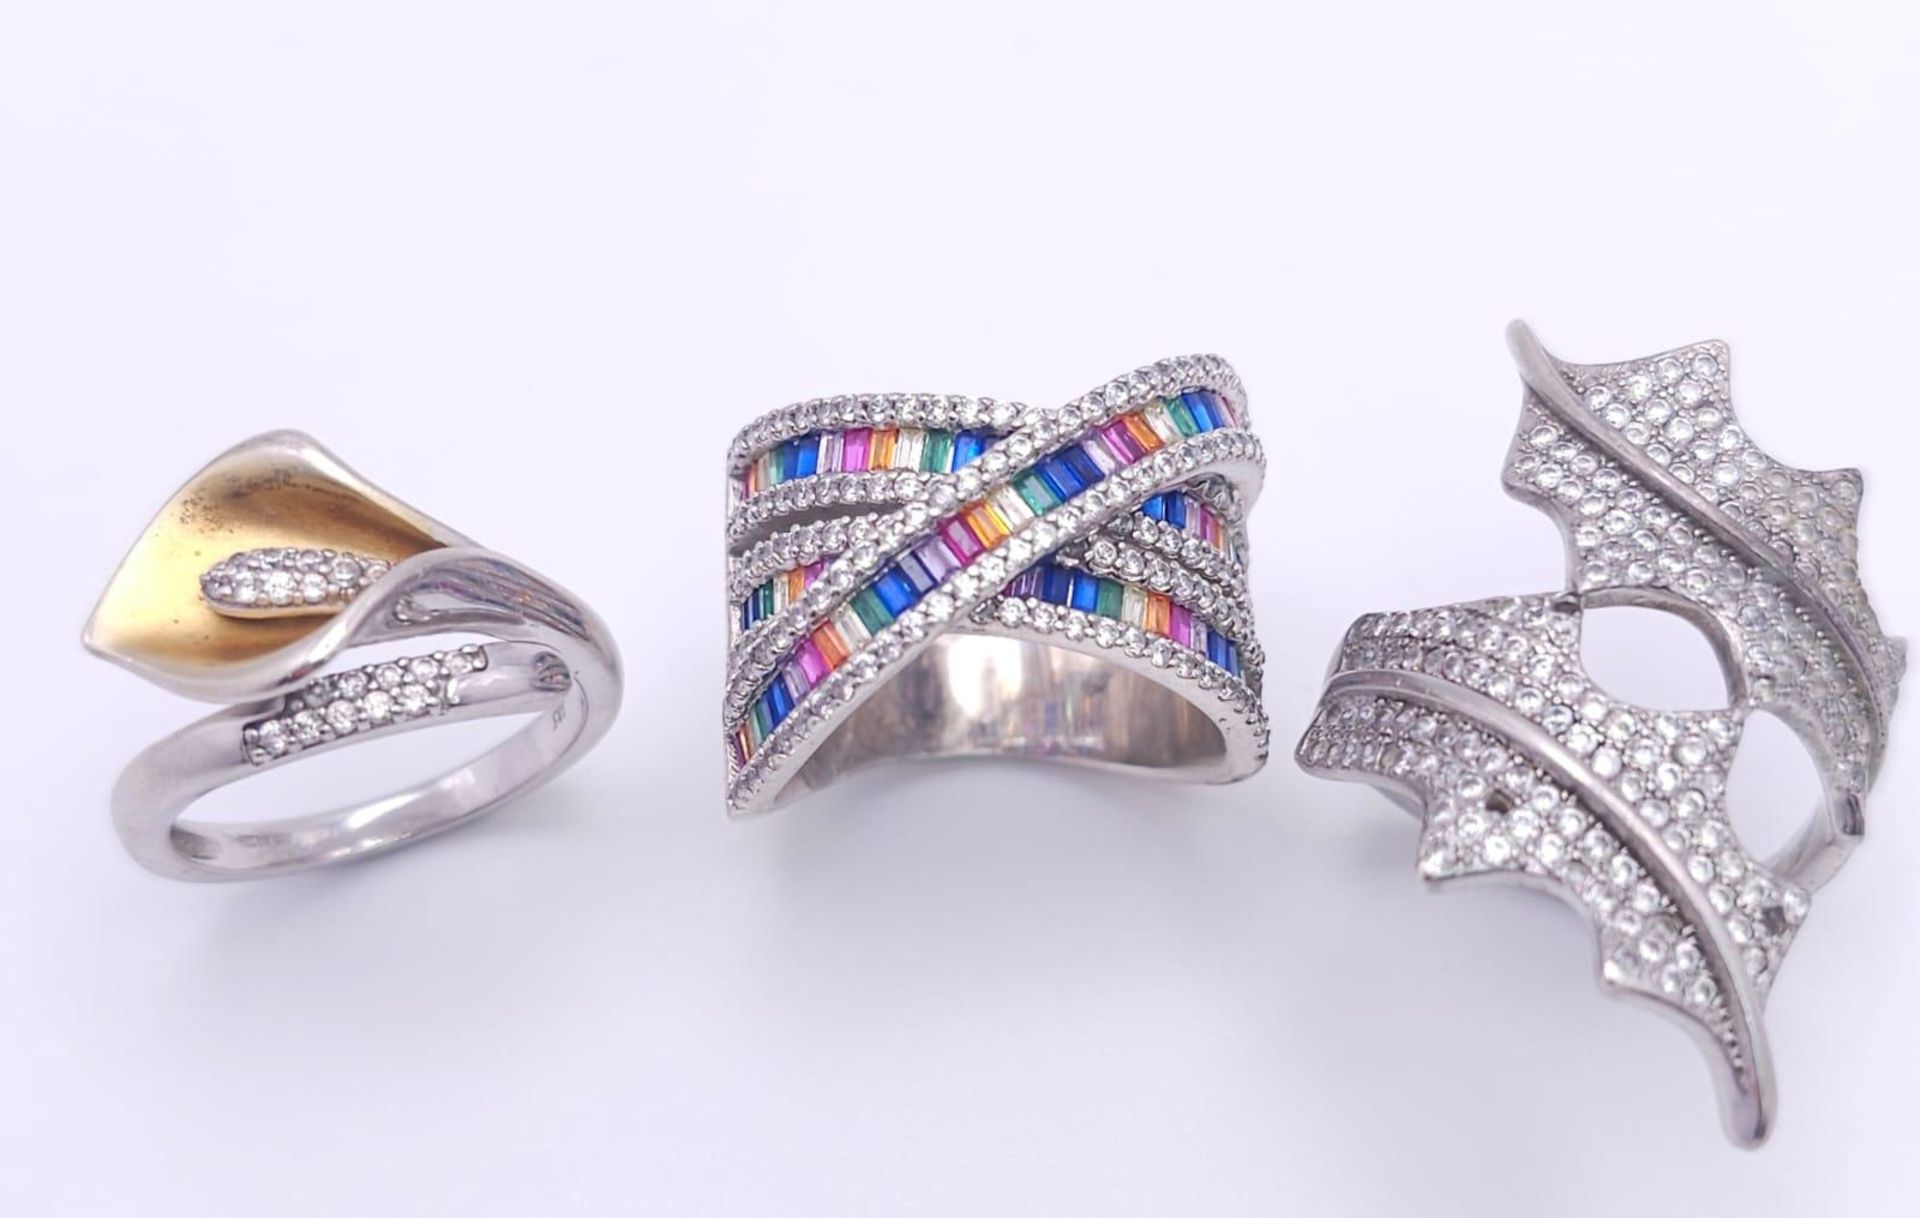 Three Different Style Fancy Sterling Silver Rings - 2 x P, 1 x N. 21.2g total weight. Ref: 016551.